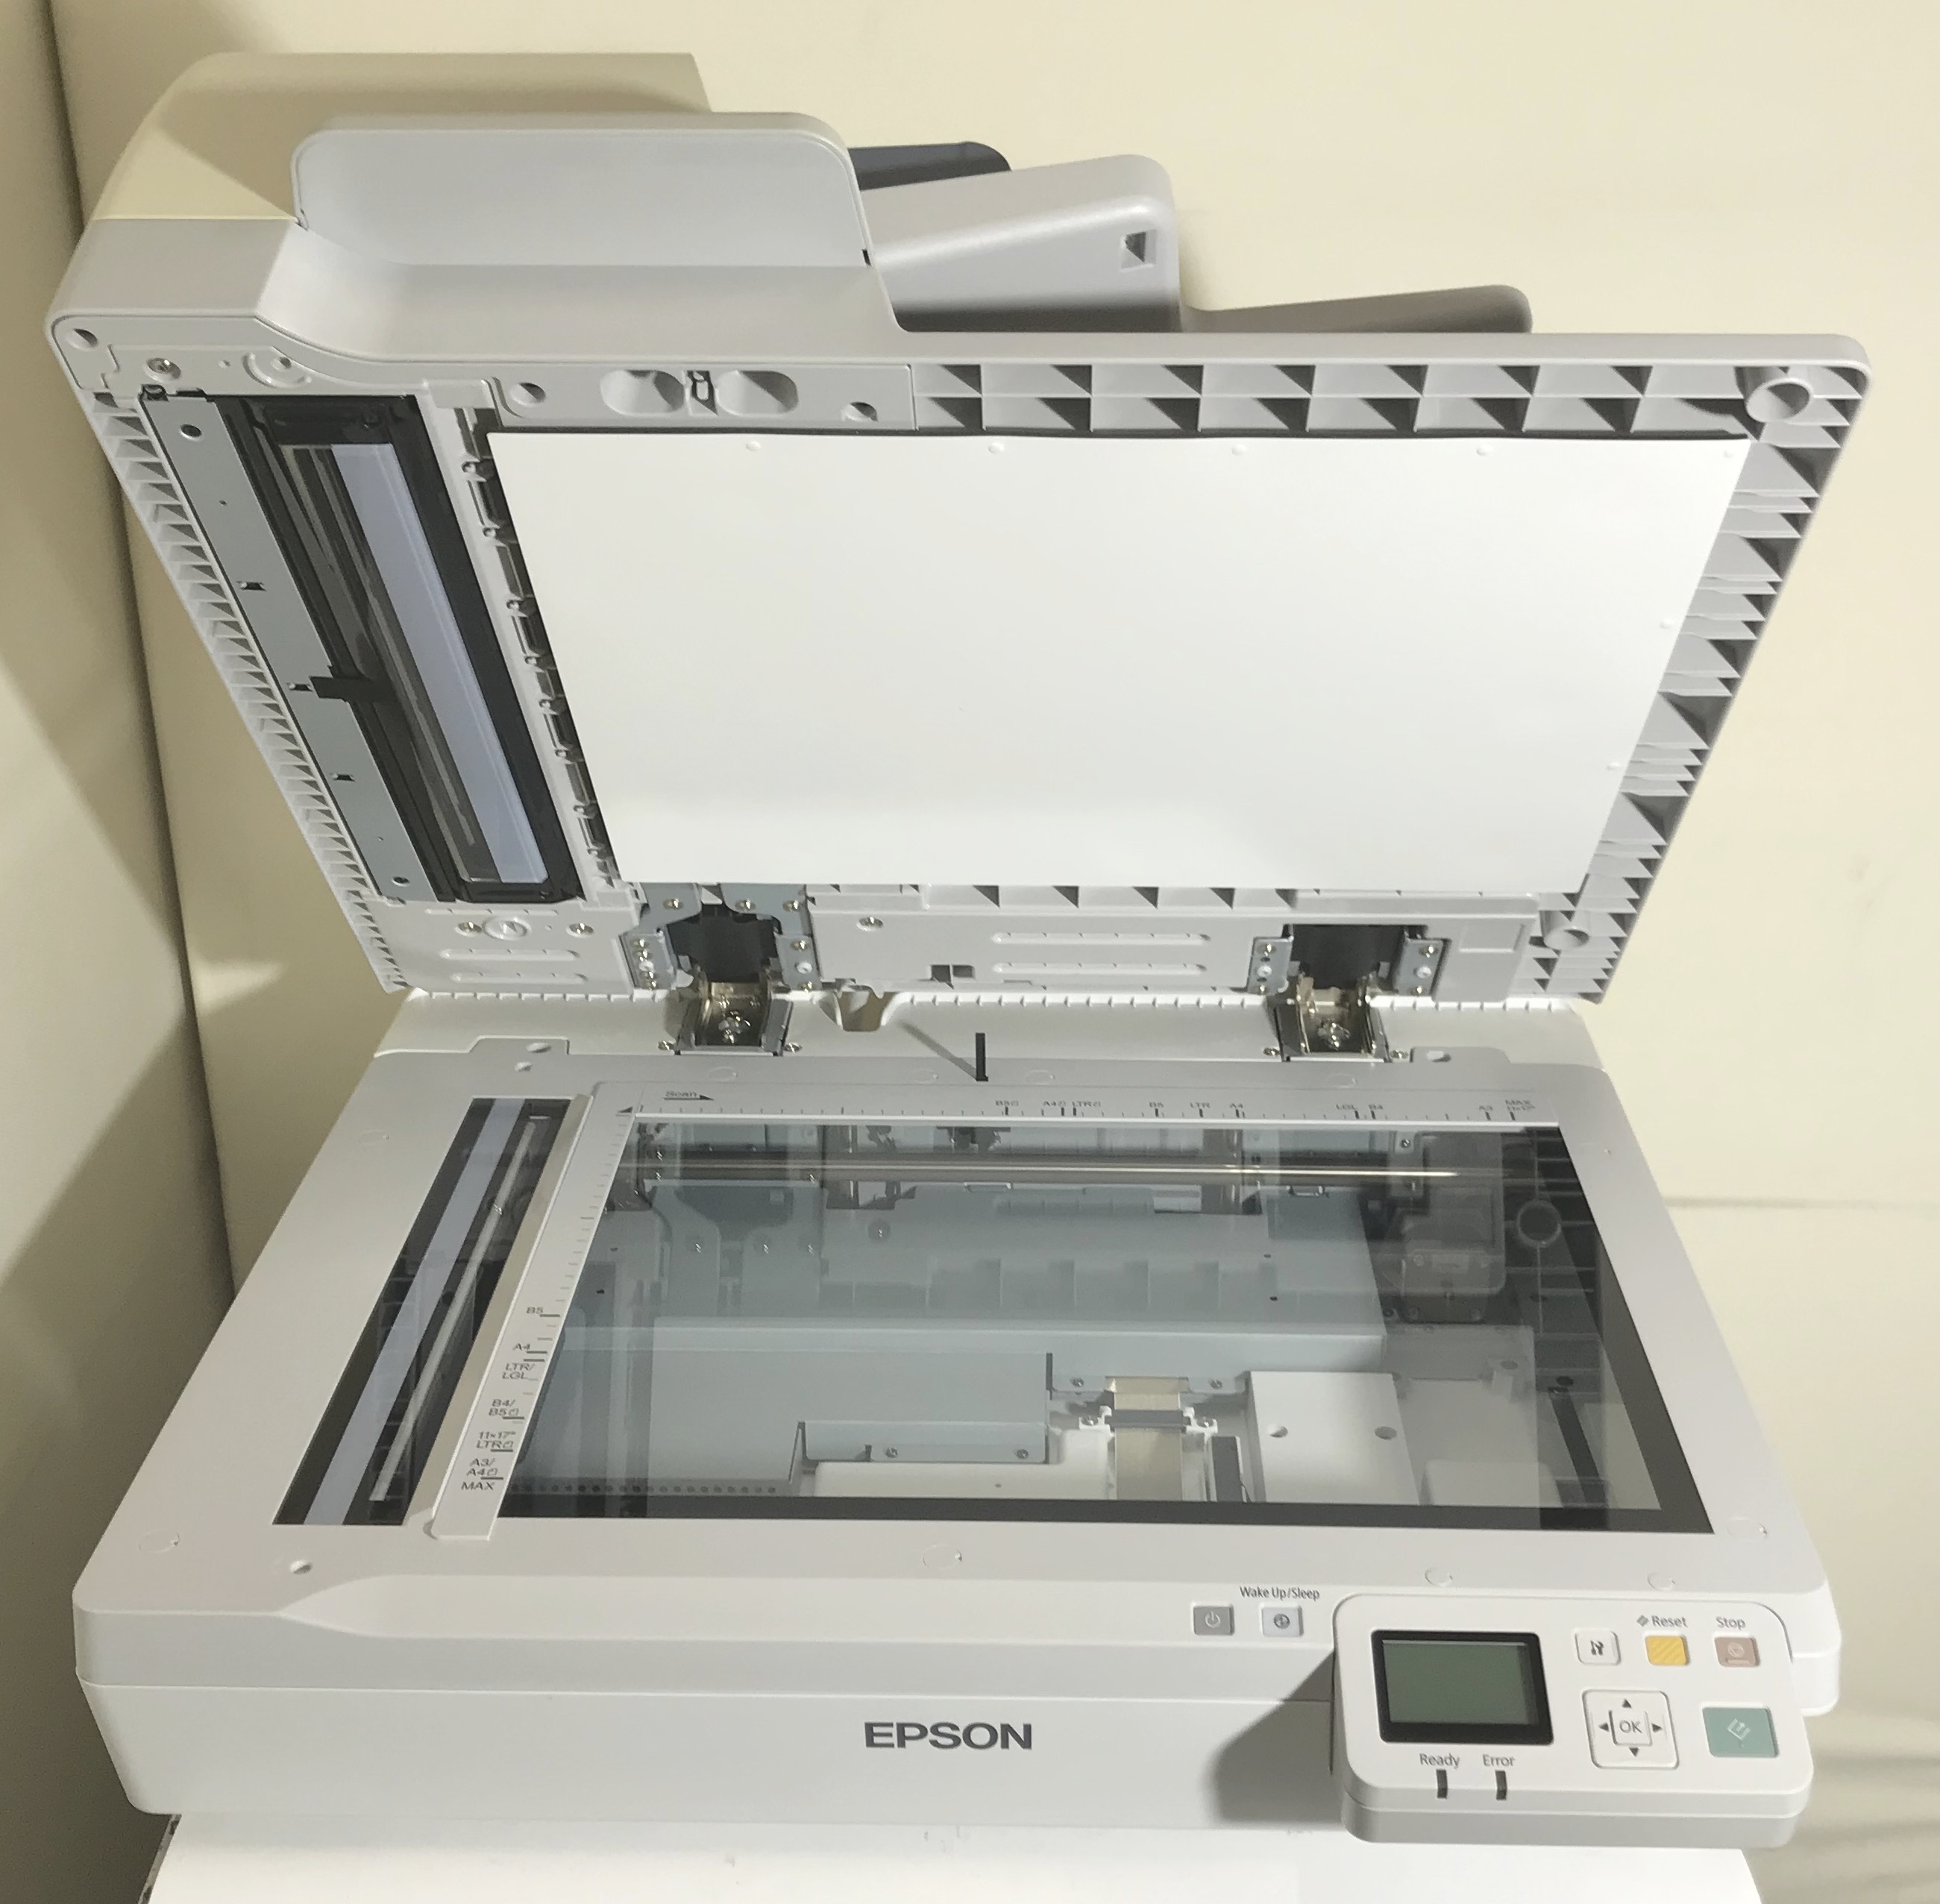 [ Saitama departure ][EPSON]A3 document scanner DS-60000 * network panel installing * counter 454 sheets * operation verification settled * (9-4218)